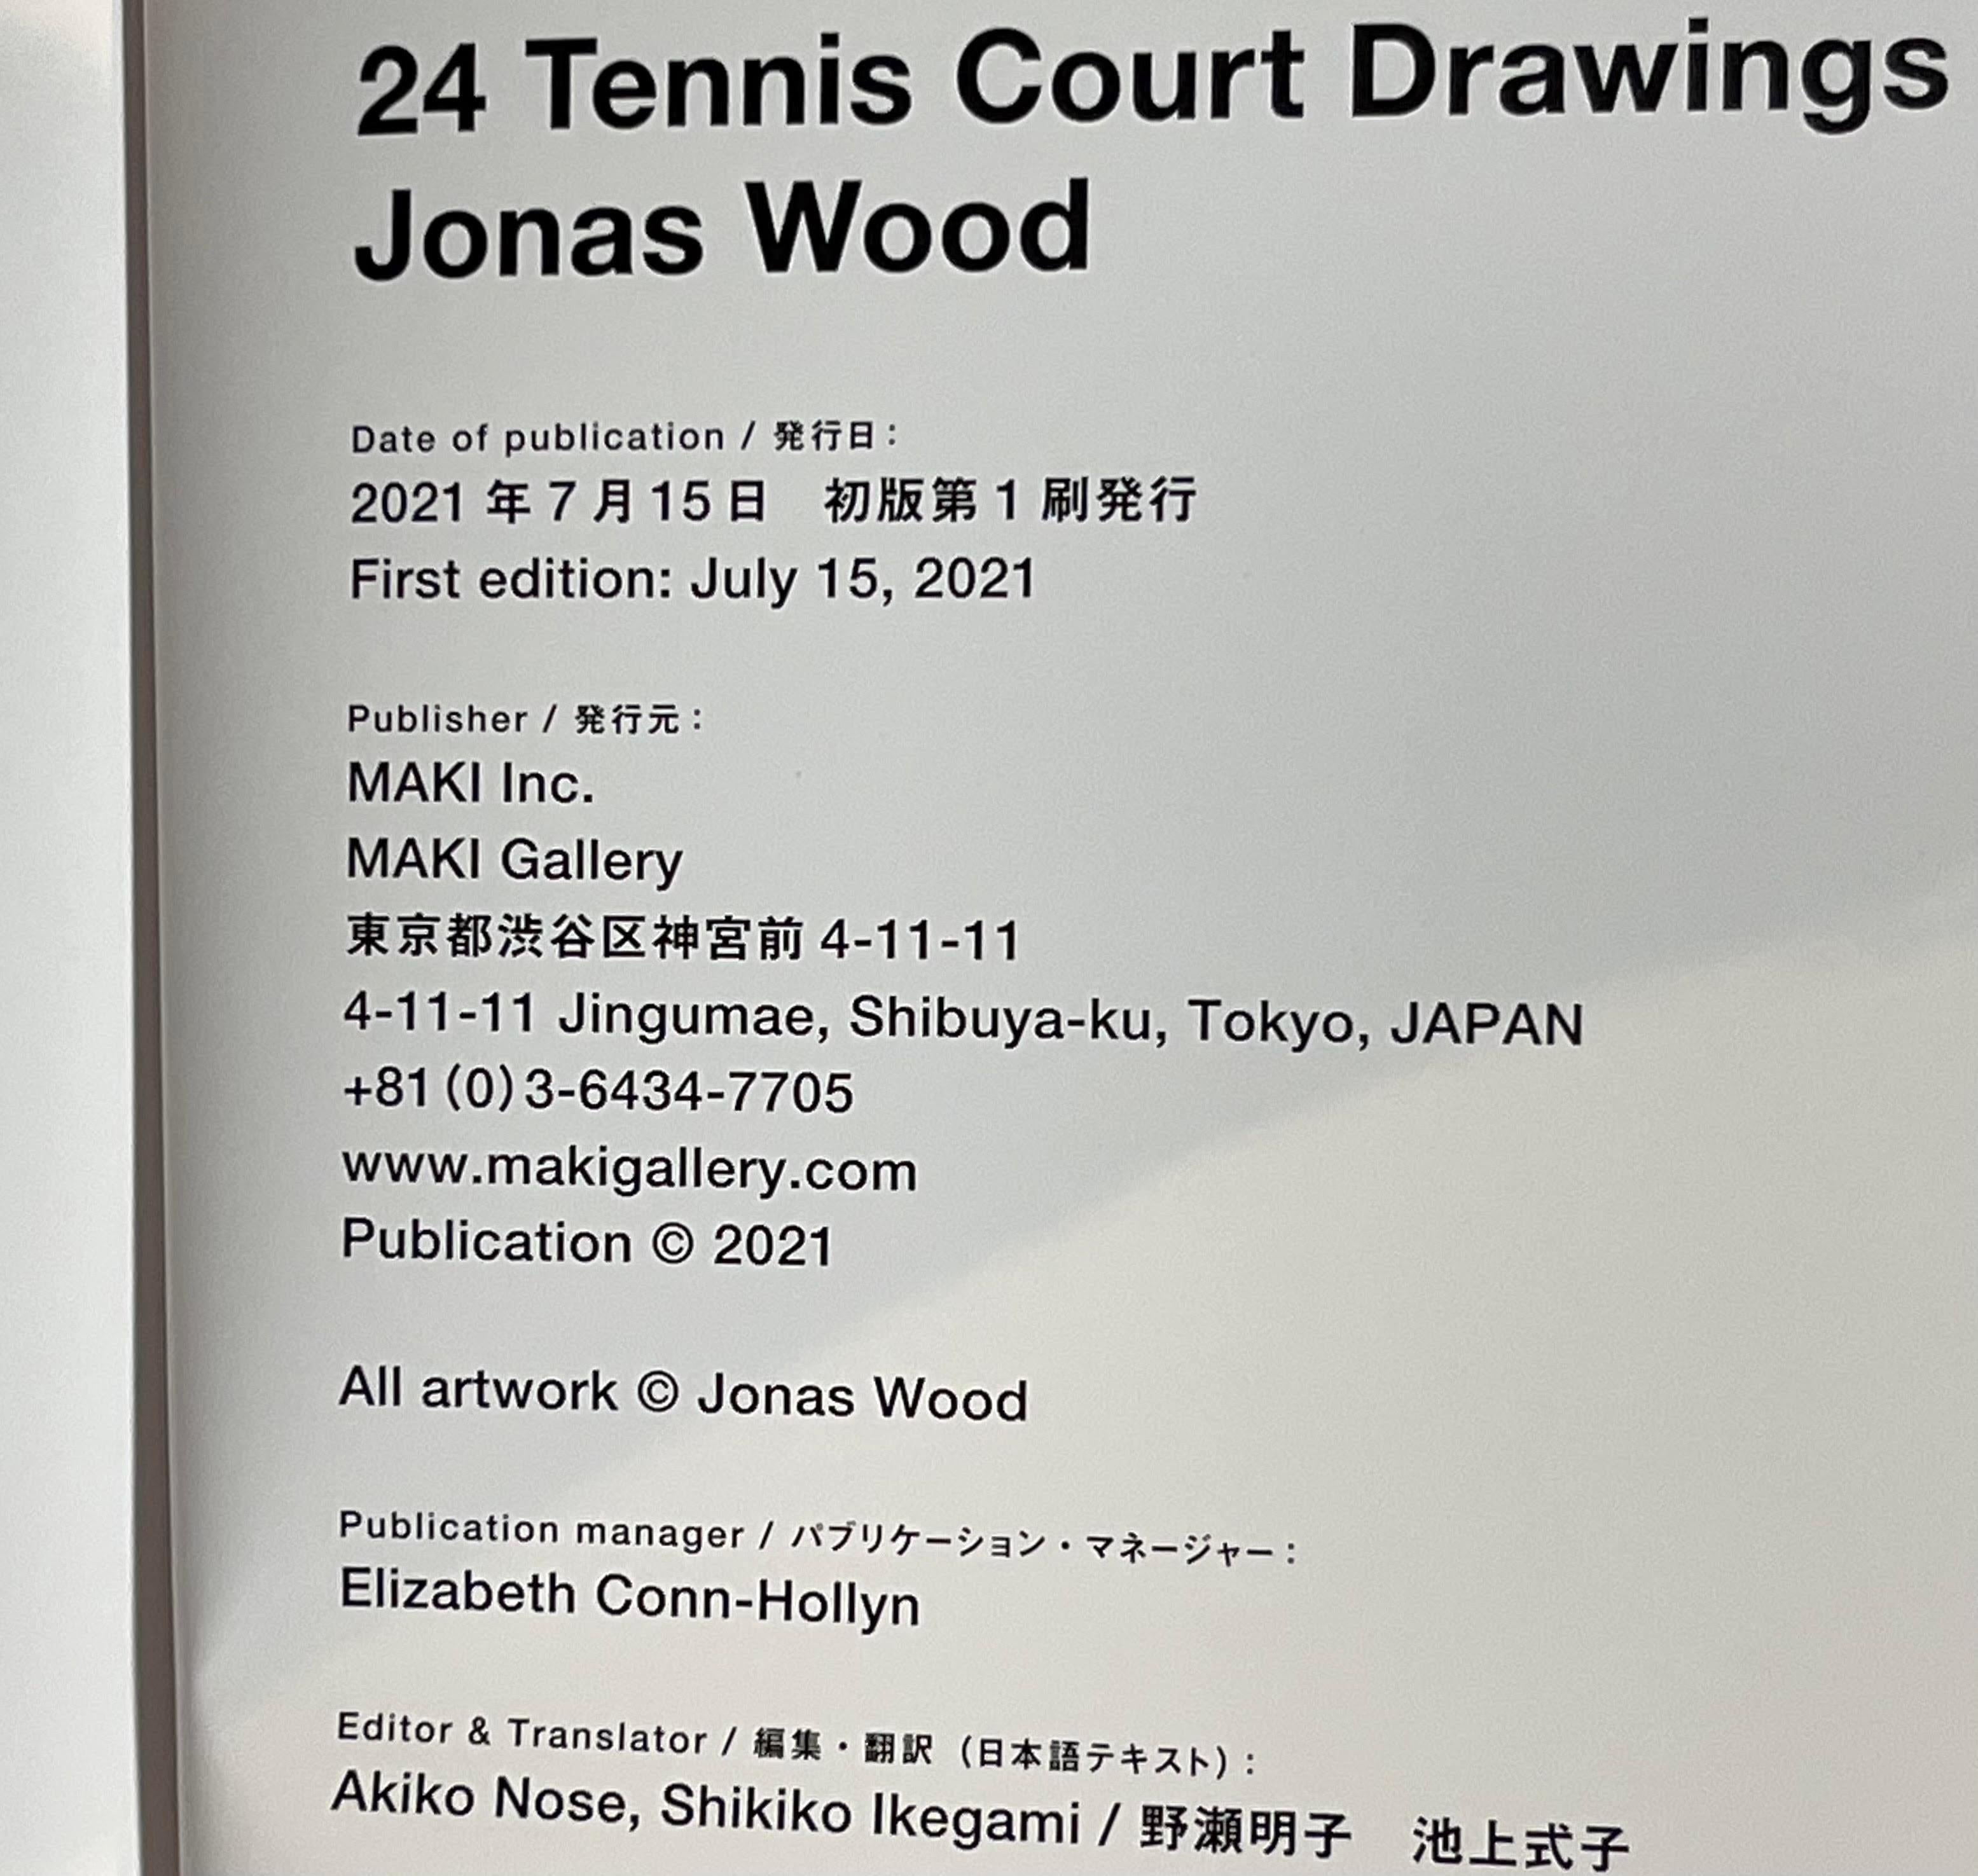 Jonas Wood 24 Tennis Court Drawings book (signed with 3 hand drawn tennis balls) For Sale 5